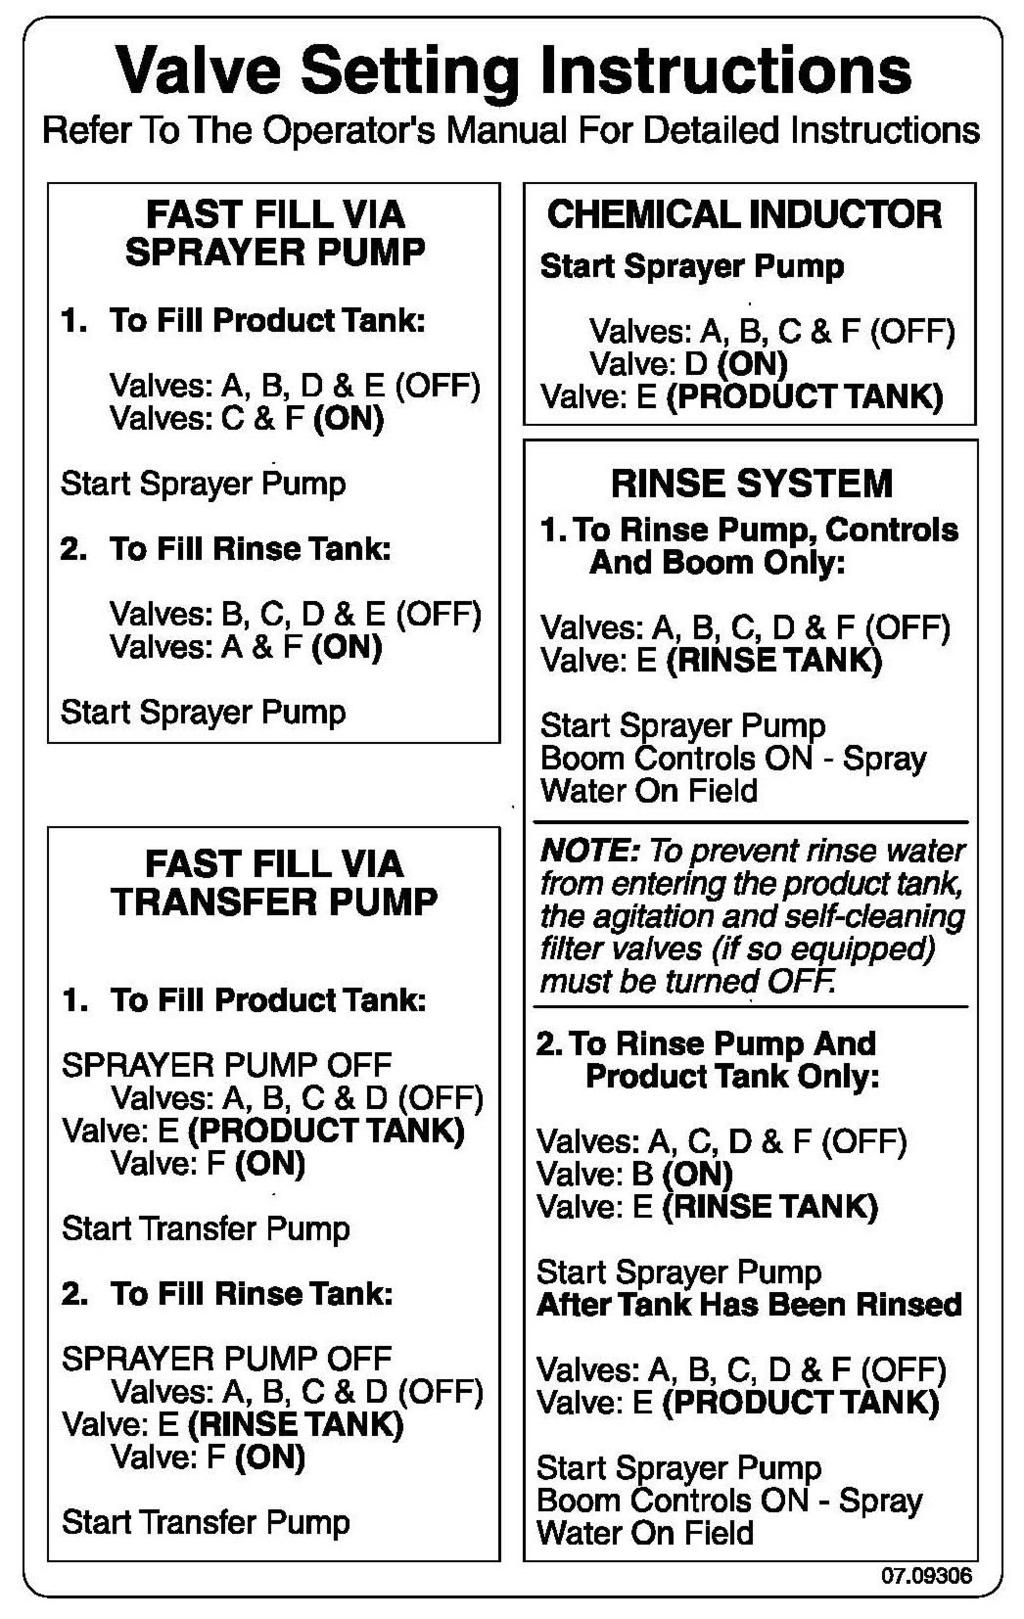 Instructions Valve Settings For Accessory Kits Refer